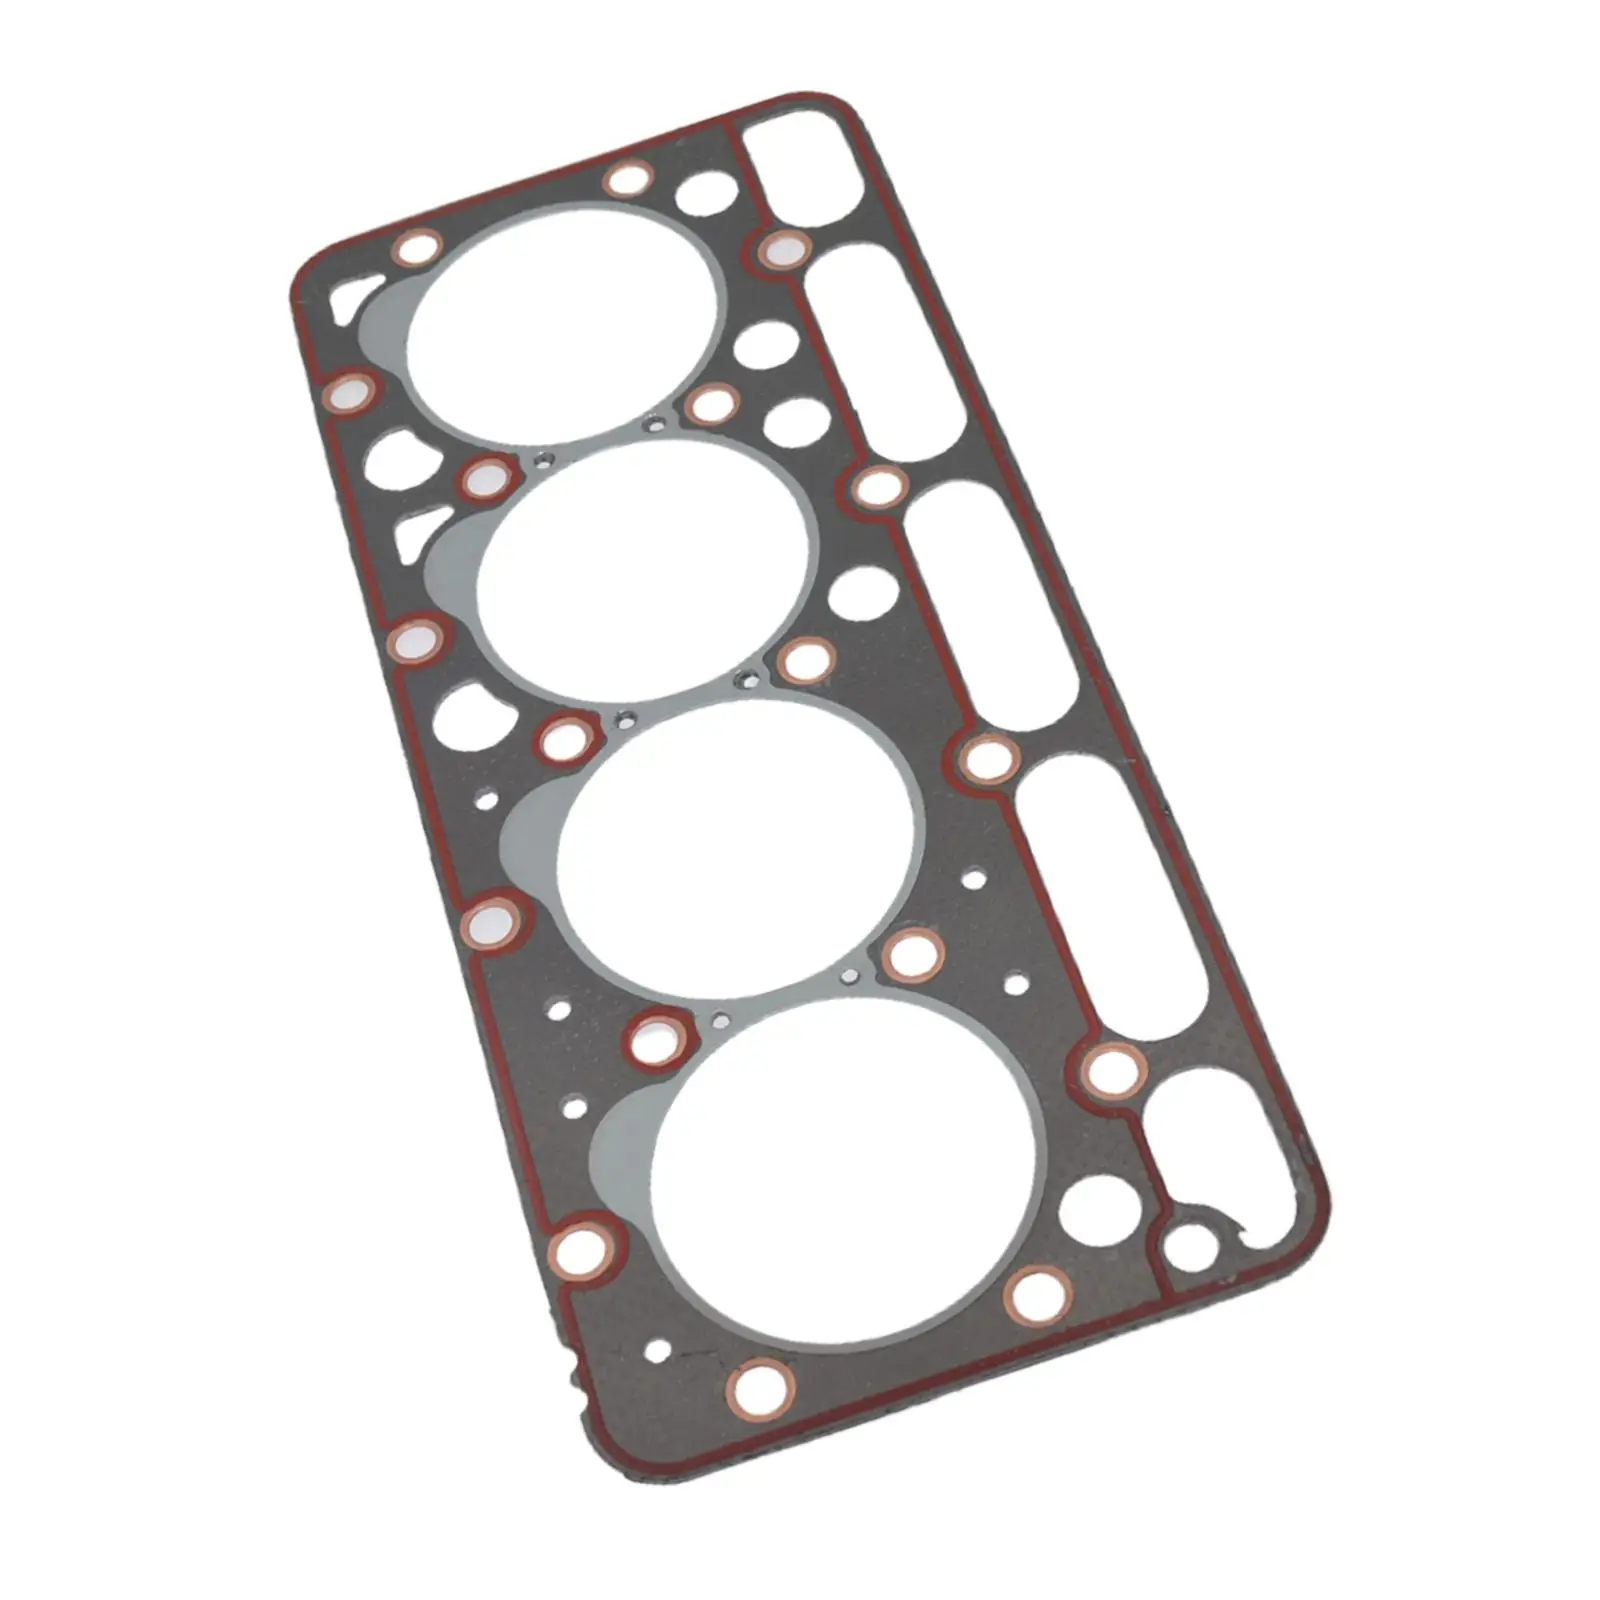 19077-03310 Cylinder Head Gasket Replacement Accessories Premium Professional Parts Easy to Install Metal for Kubota Bobcat